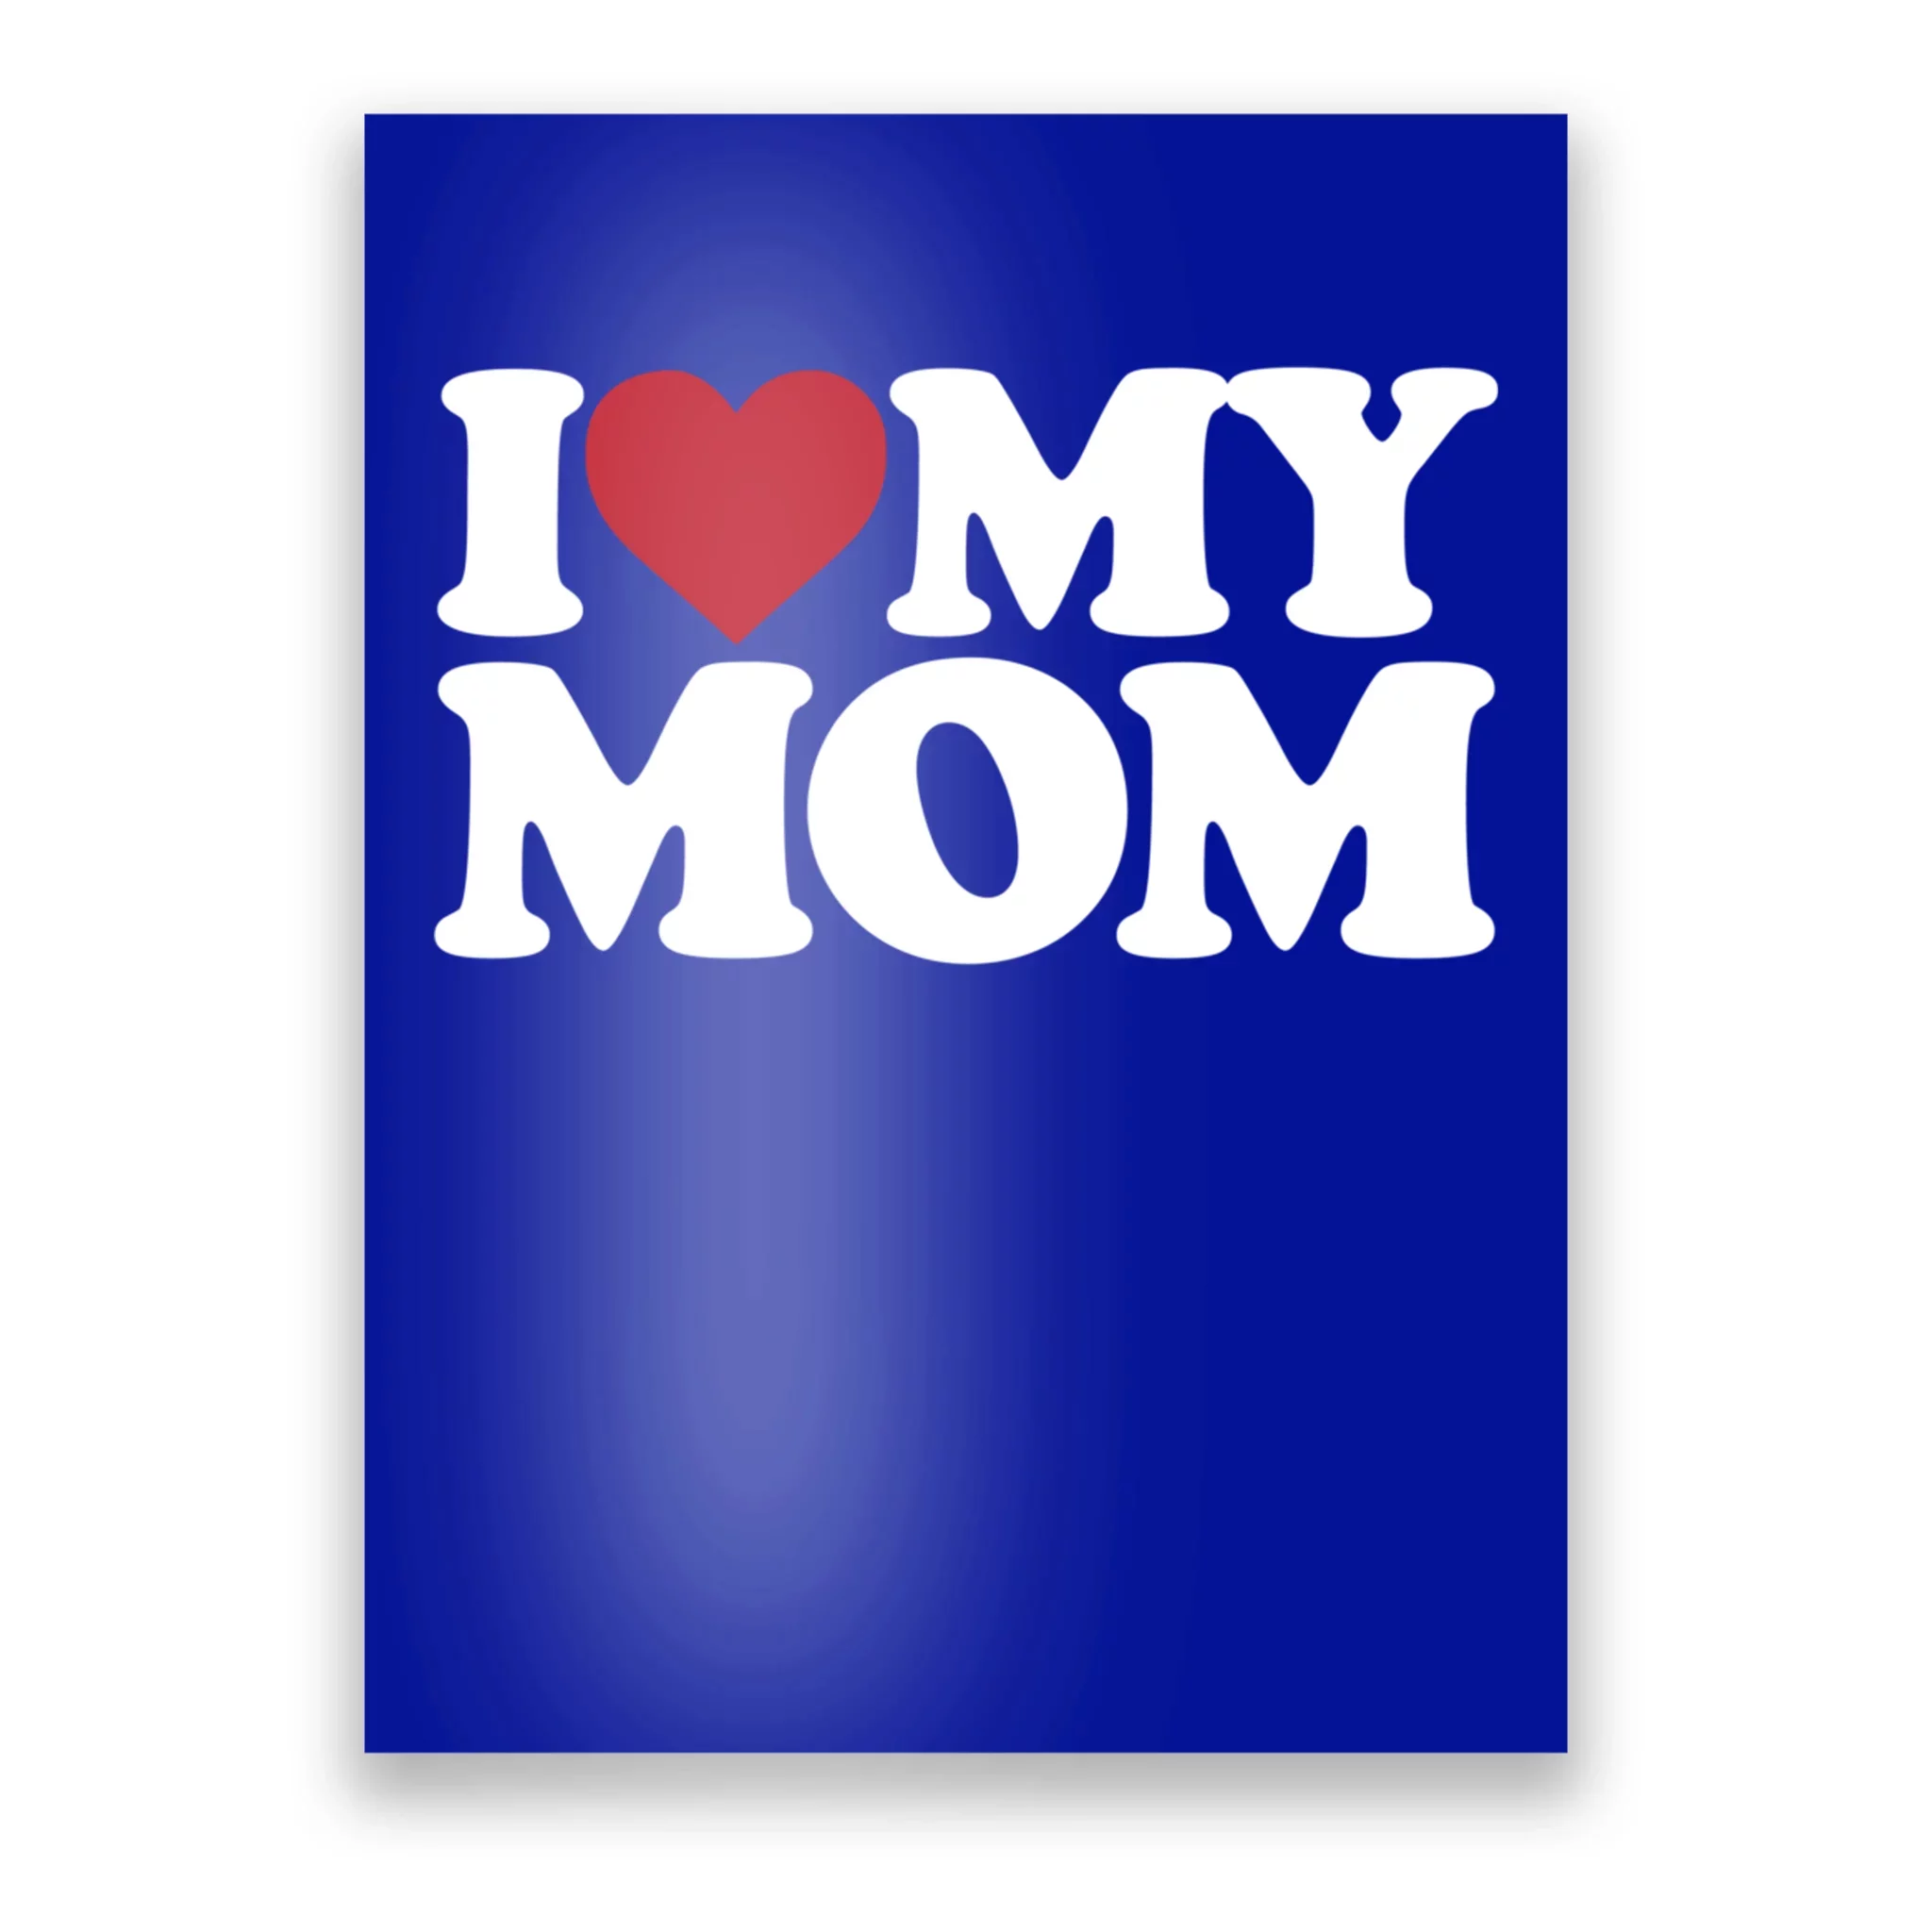 My mom my hero mothers day gift ideas best mom gifts mother's day  celebration graphic design Poster by Mounir Khalfouf - Pixels Merch